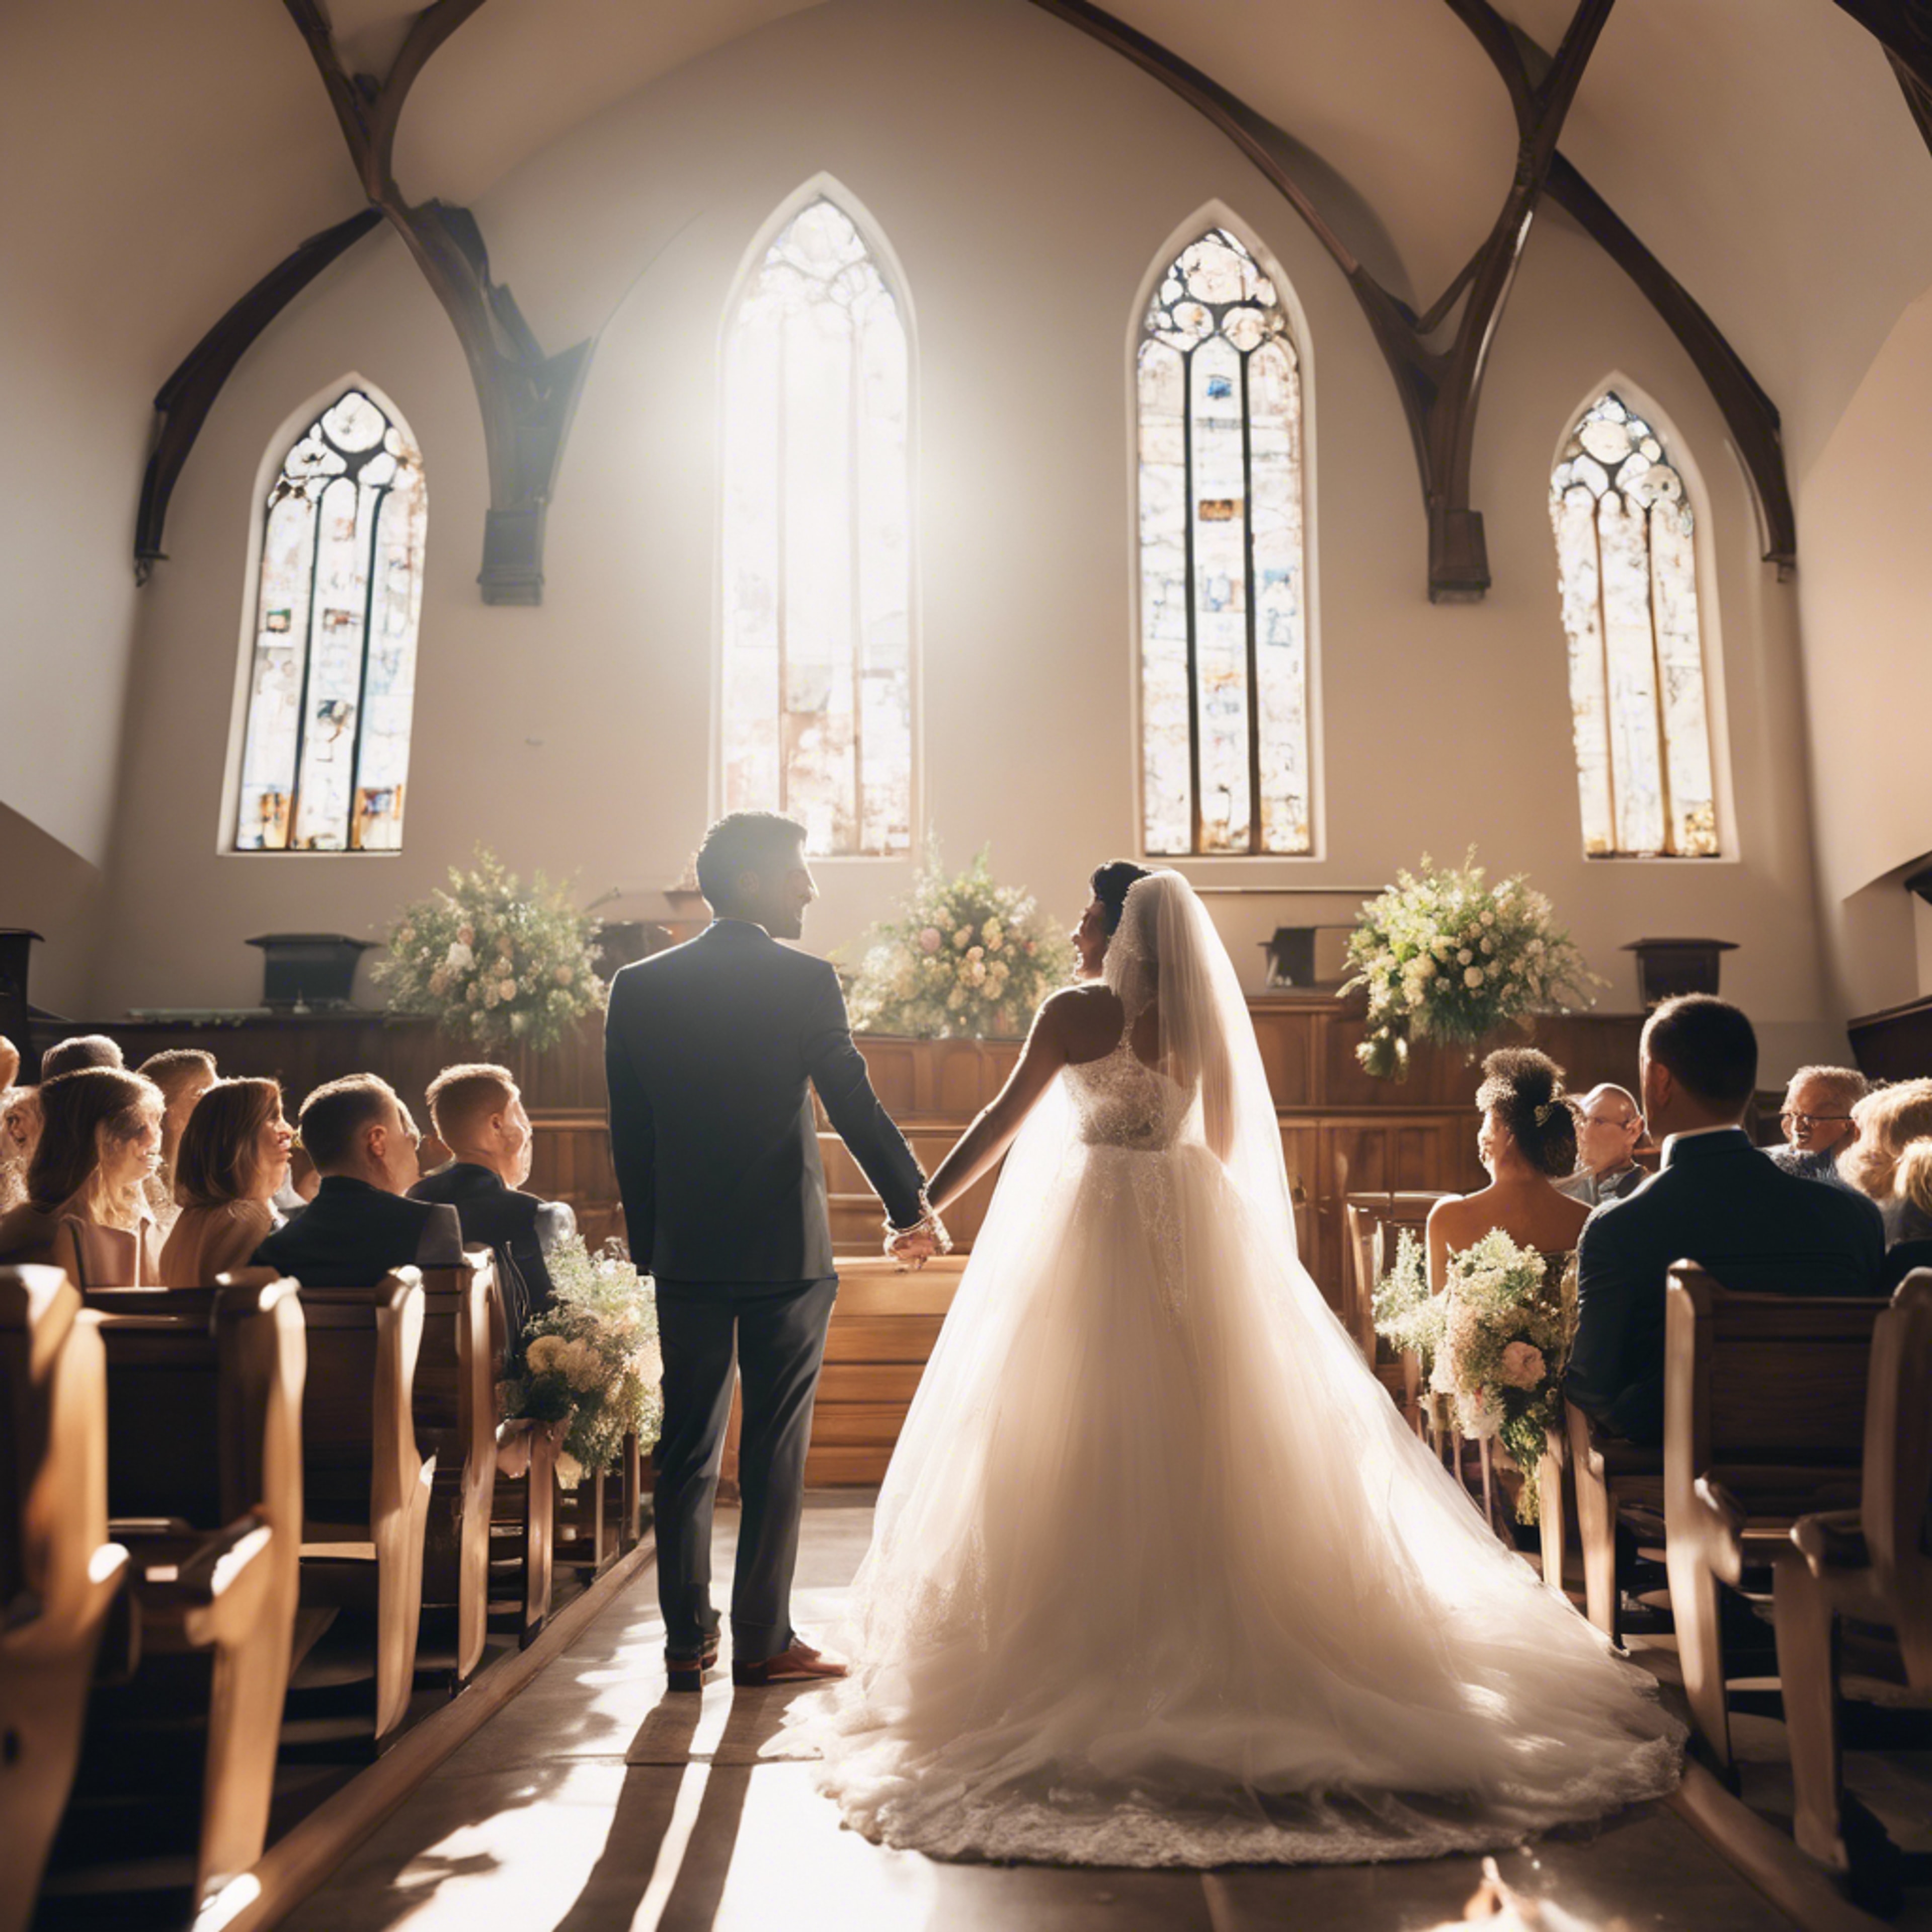 A happy couple getting married in a sunlit church, filled with joy and love. Fondo de pantalla[c91a19bd1c8e4c9b9bbb]